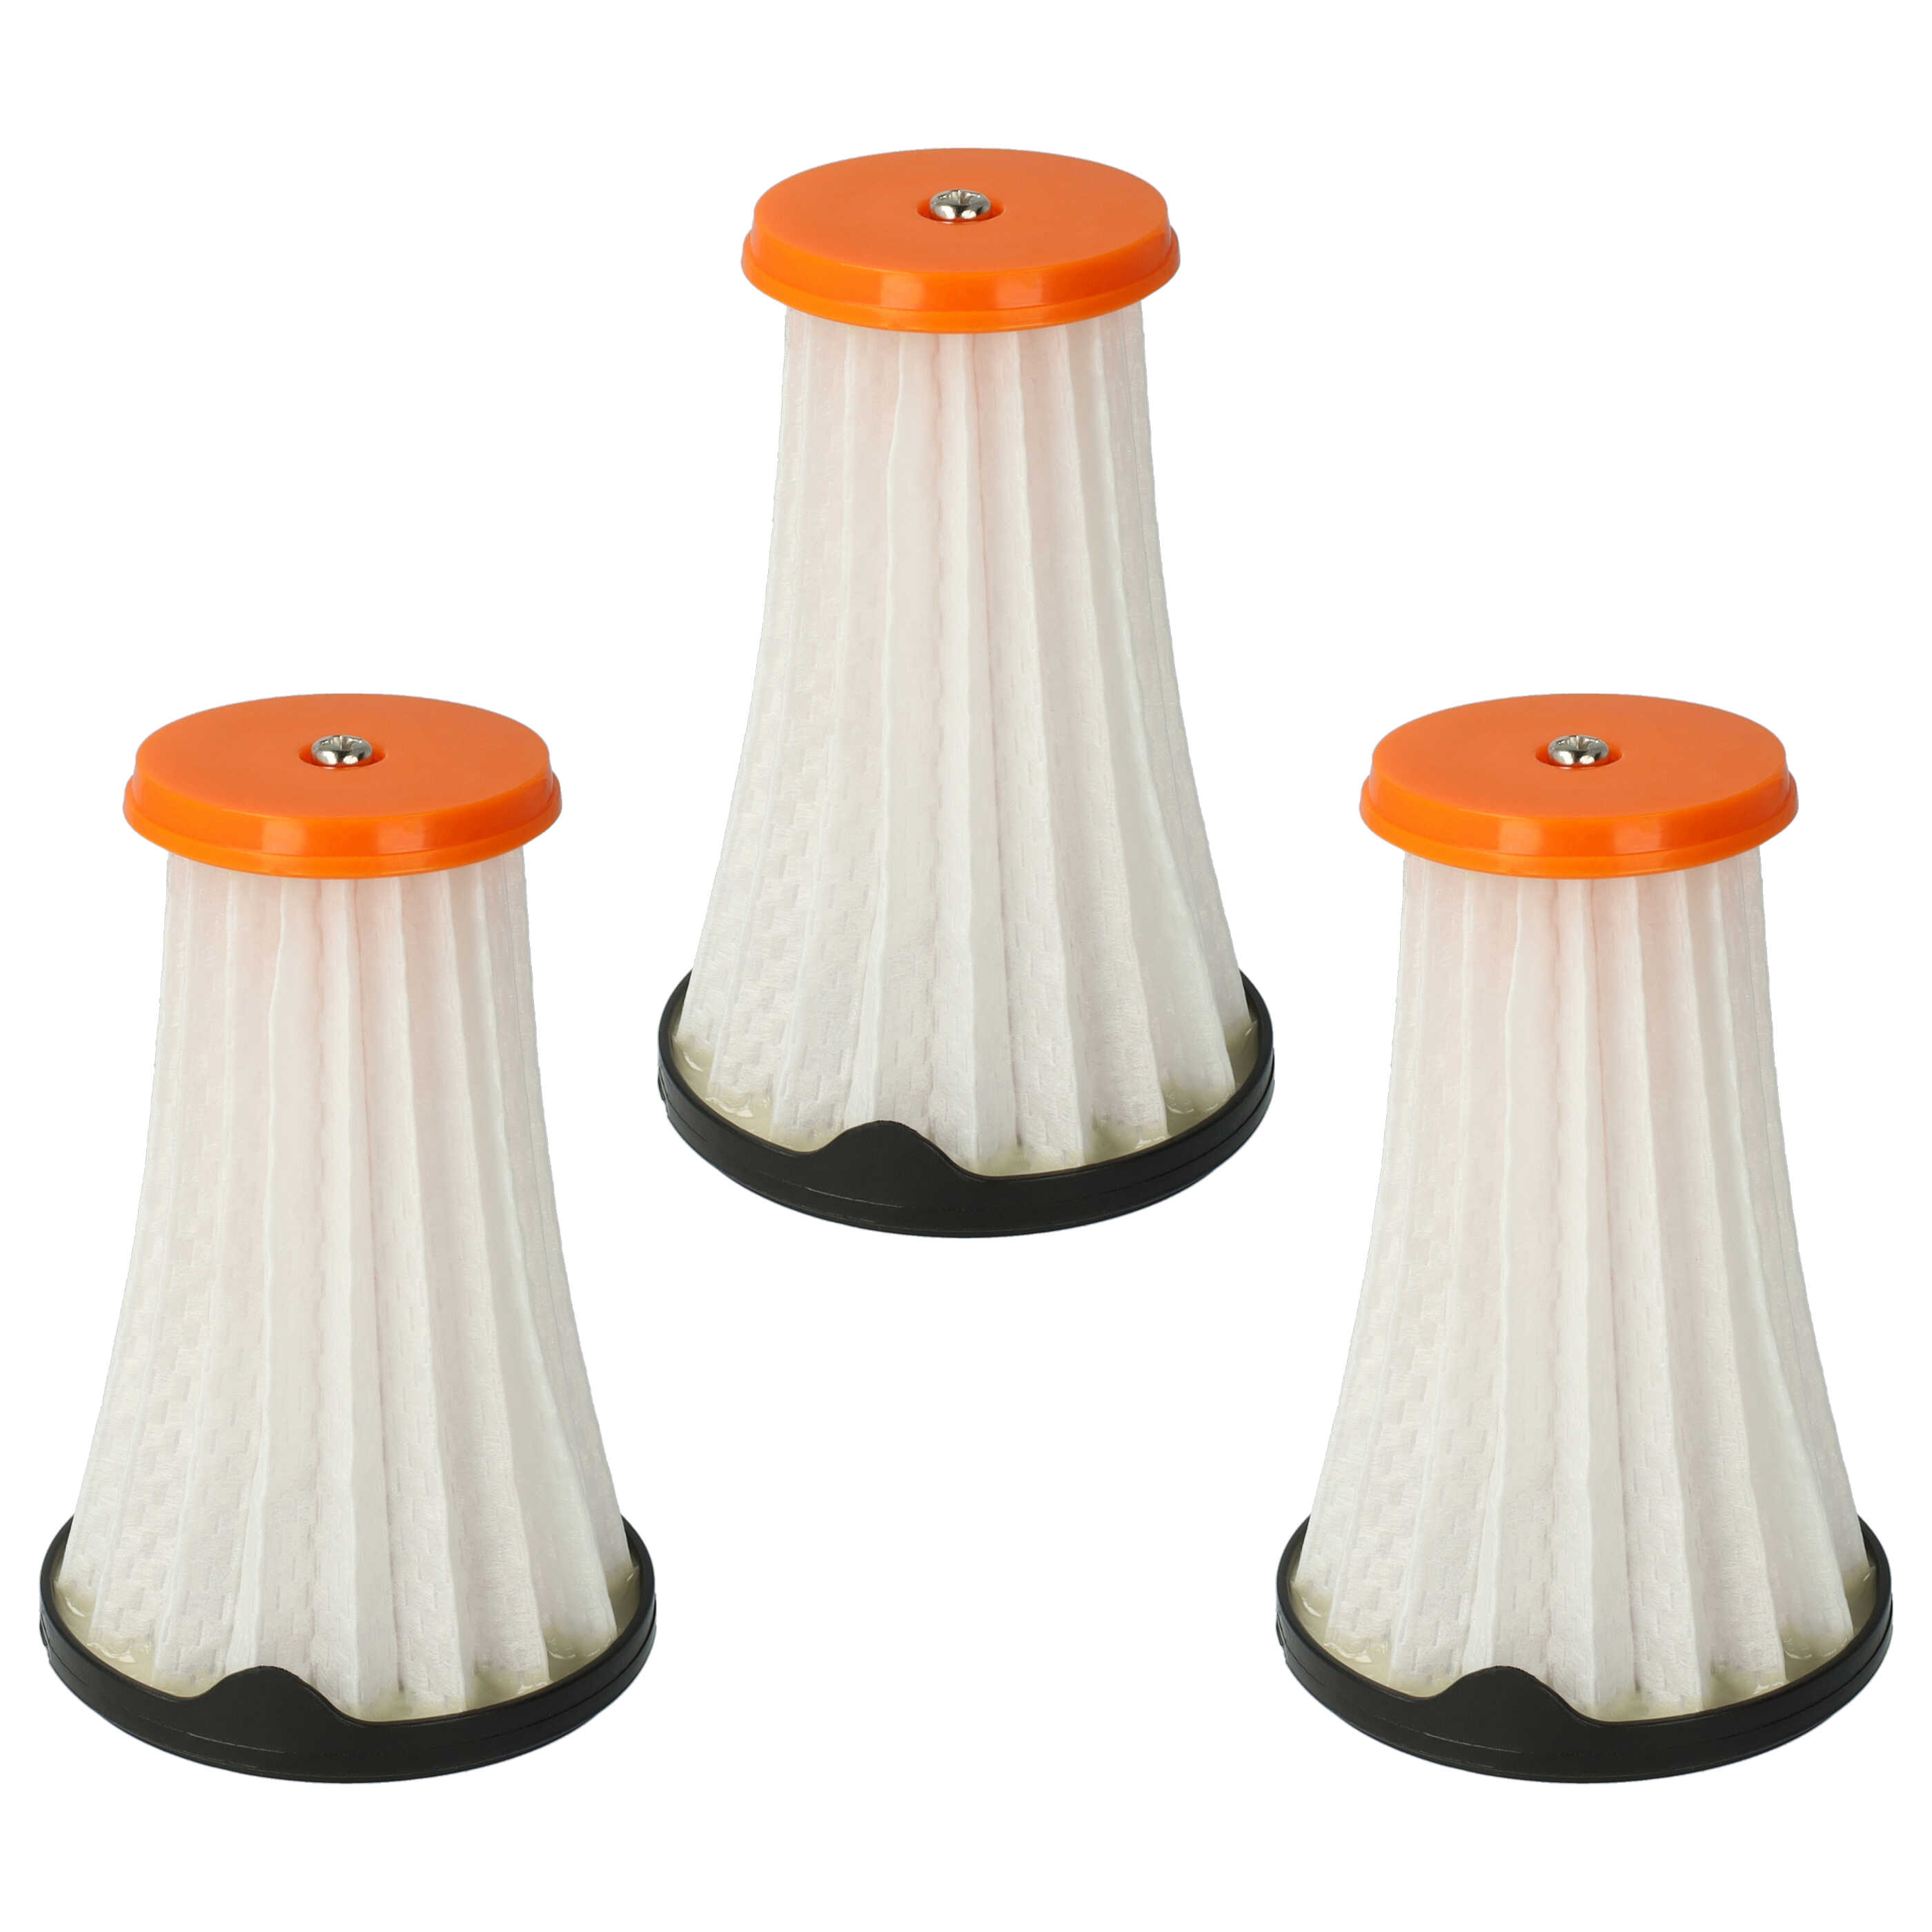 3x inner filter replaces AEG 900167153, AEF 144, 9001671537 for ElectroluxVacuum Cleaner